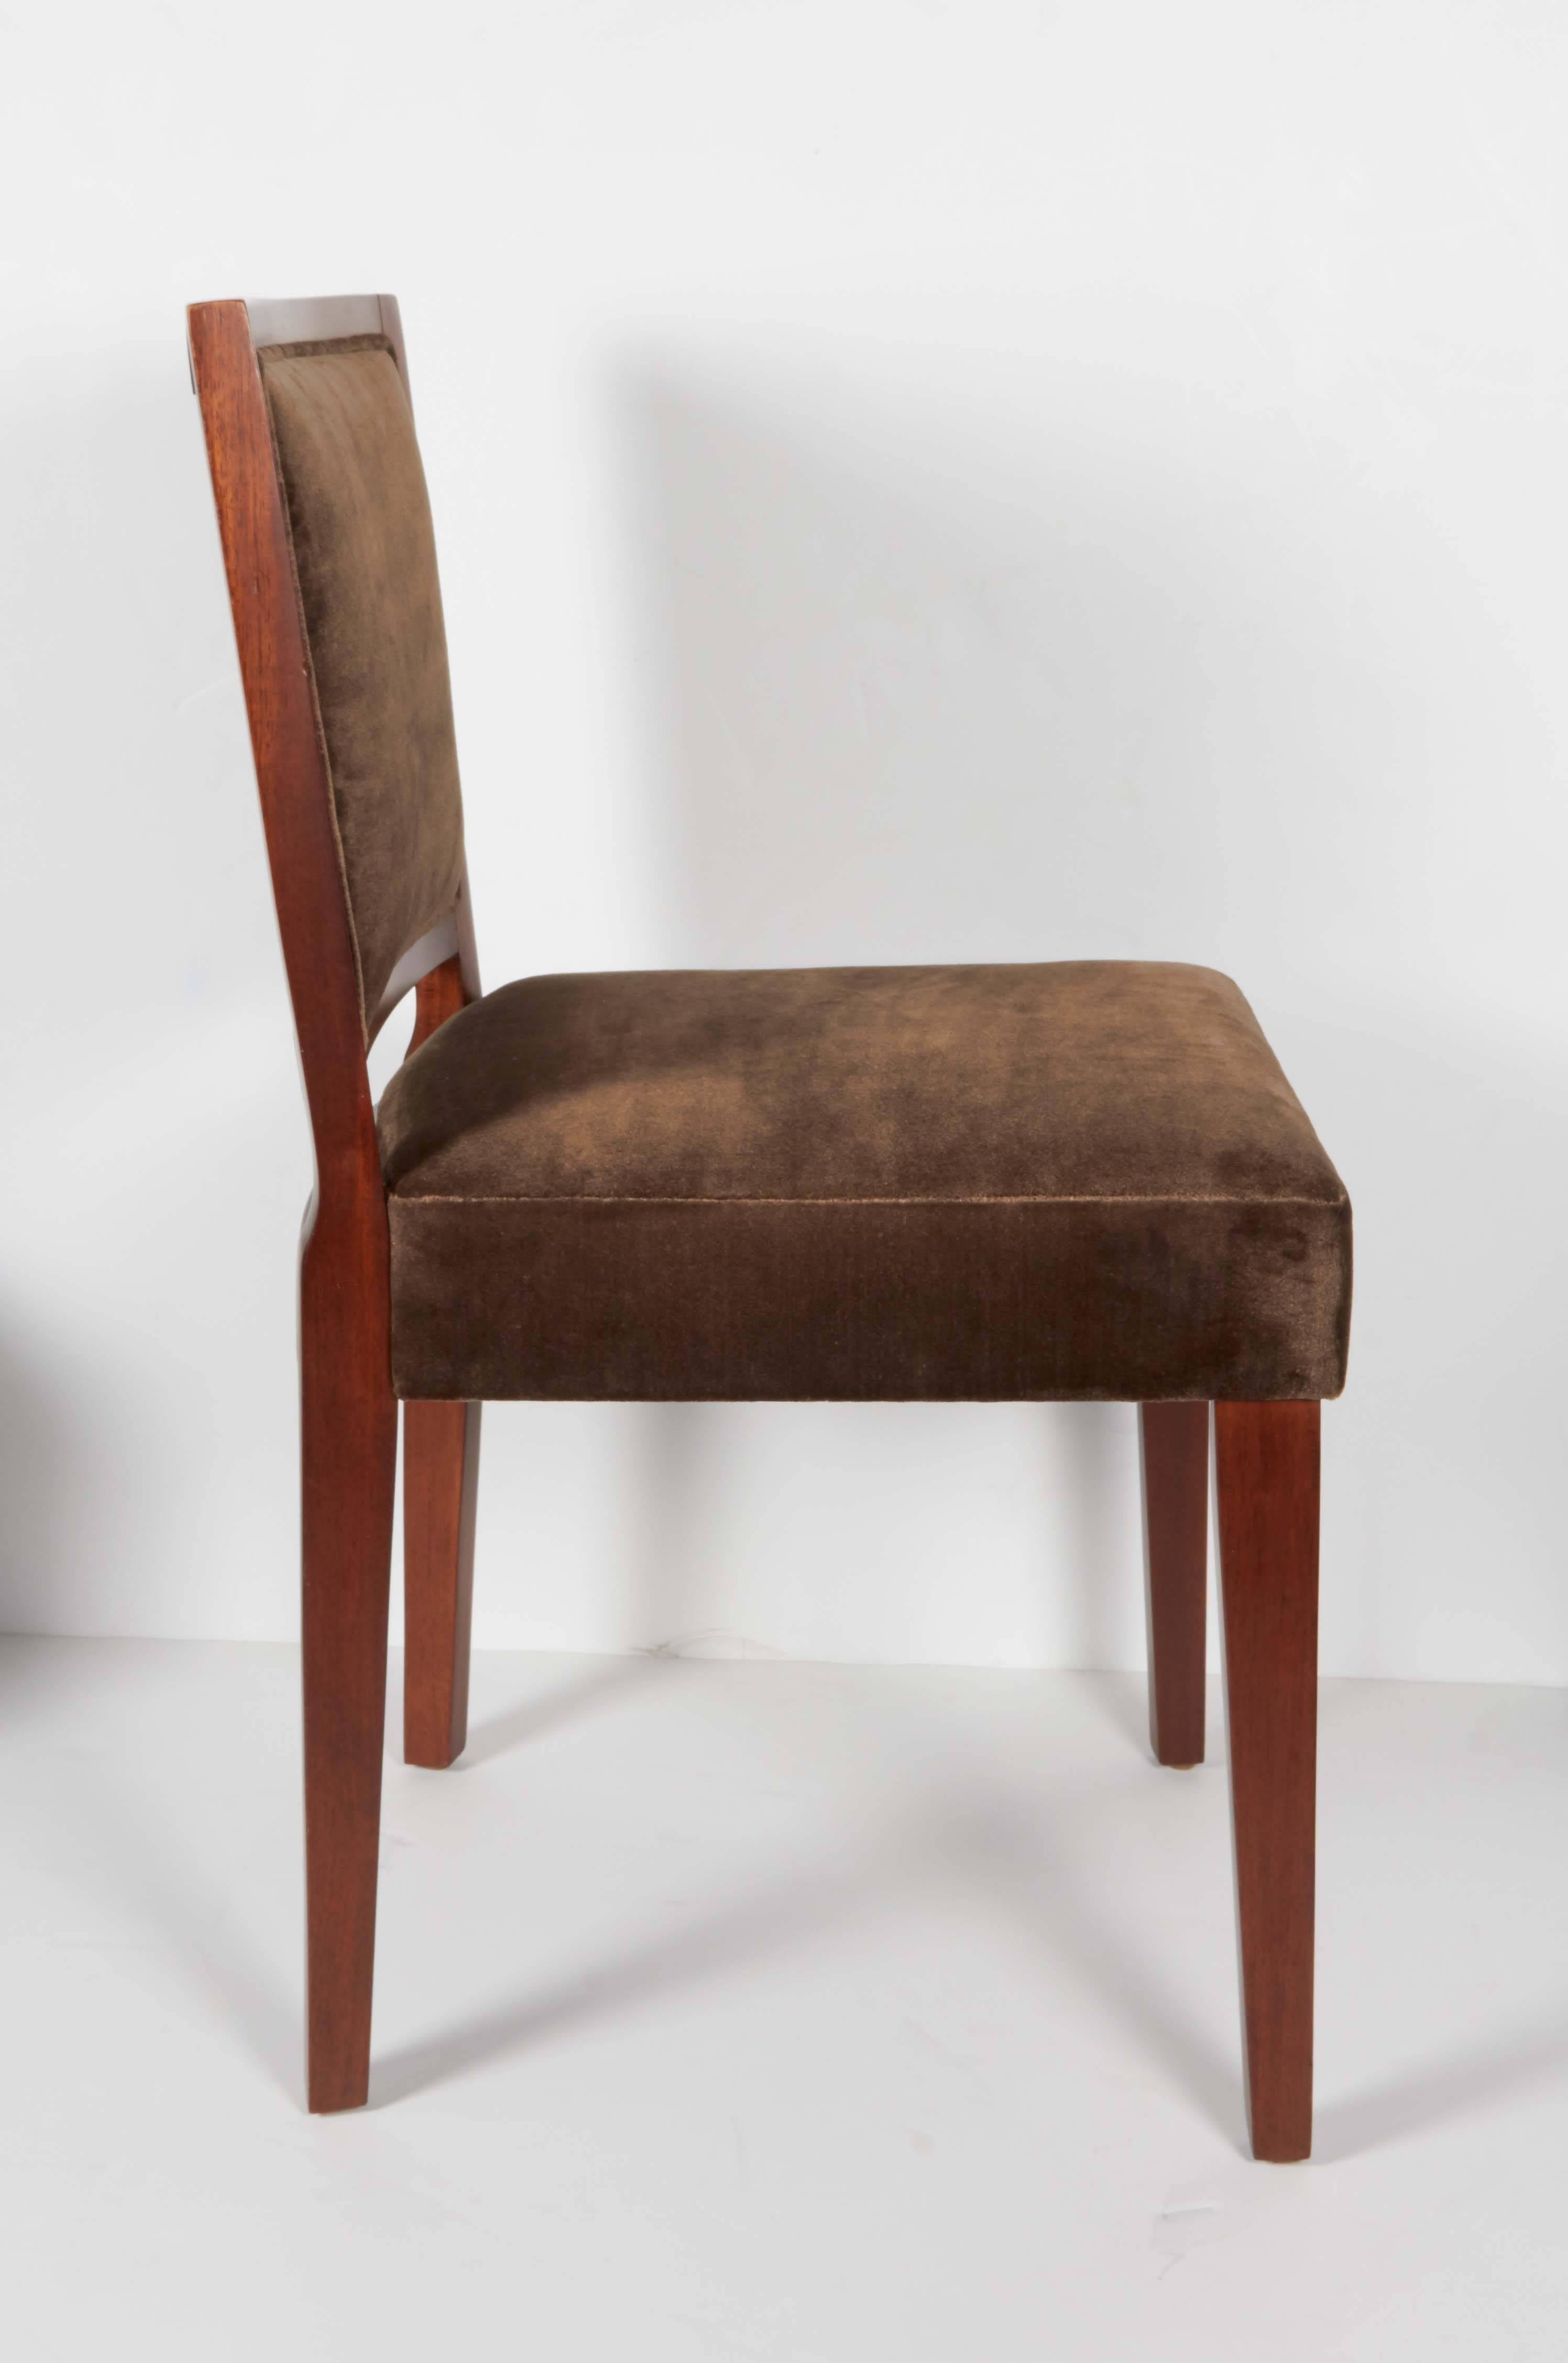 20th Century Modernist Desk Chair in Chocolate Mohair and Walnut Wood